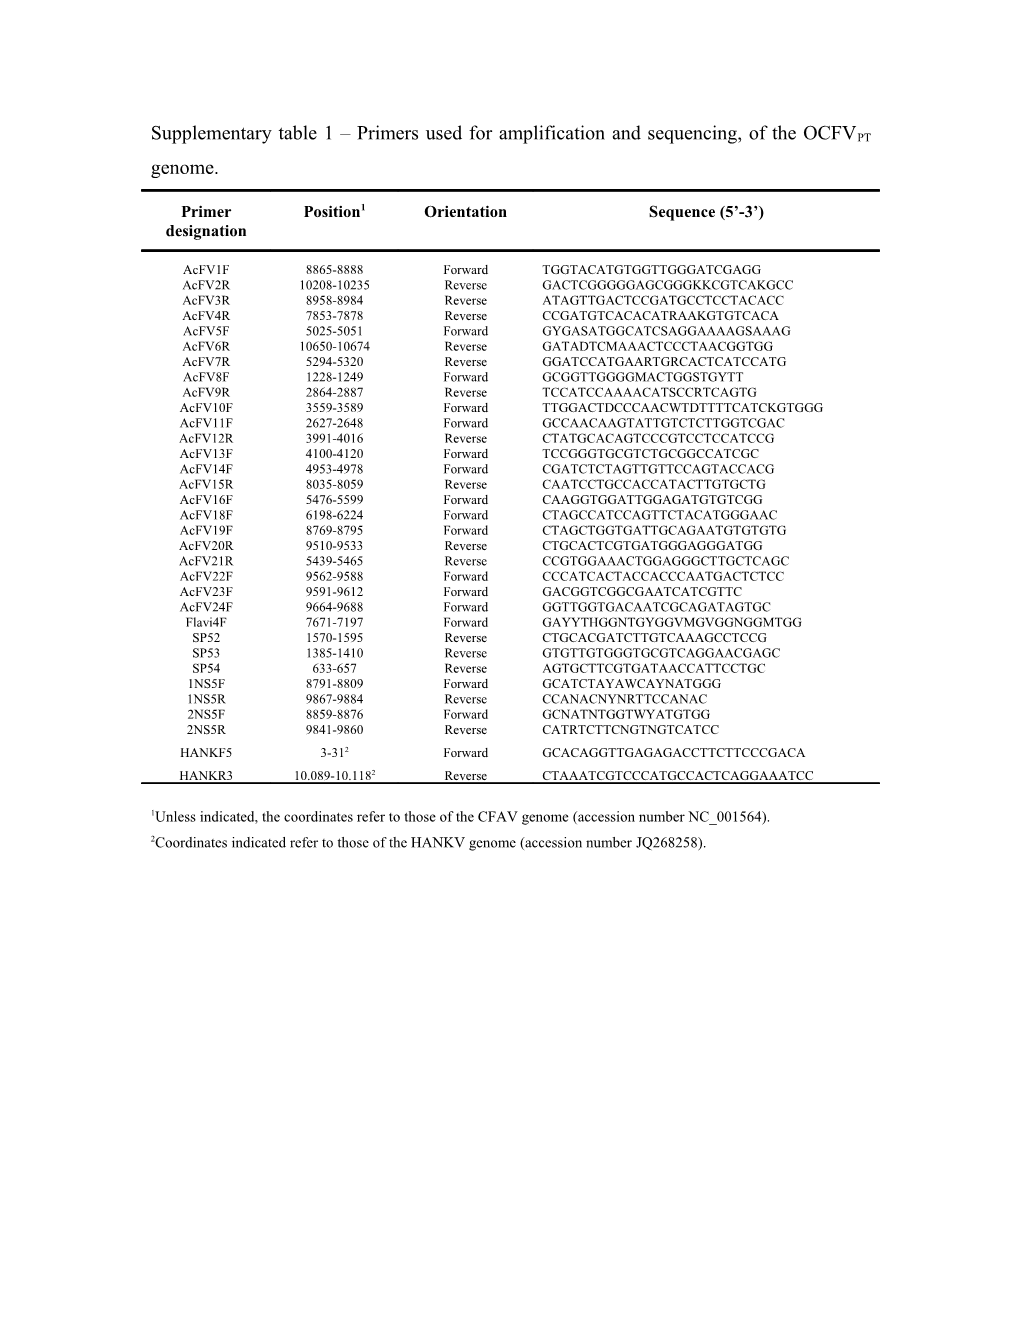 Supplementary Table 1 Primers Used for Amplification and Sequencing, of the OCFVPT Genome